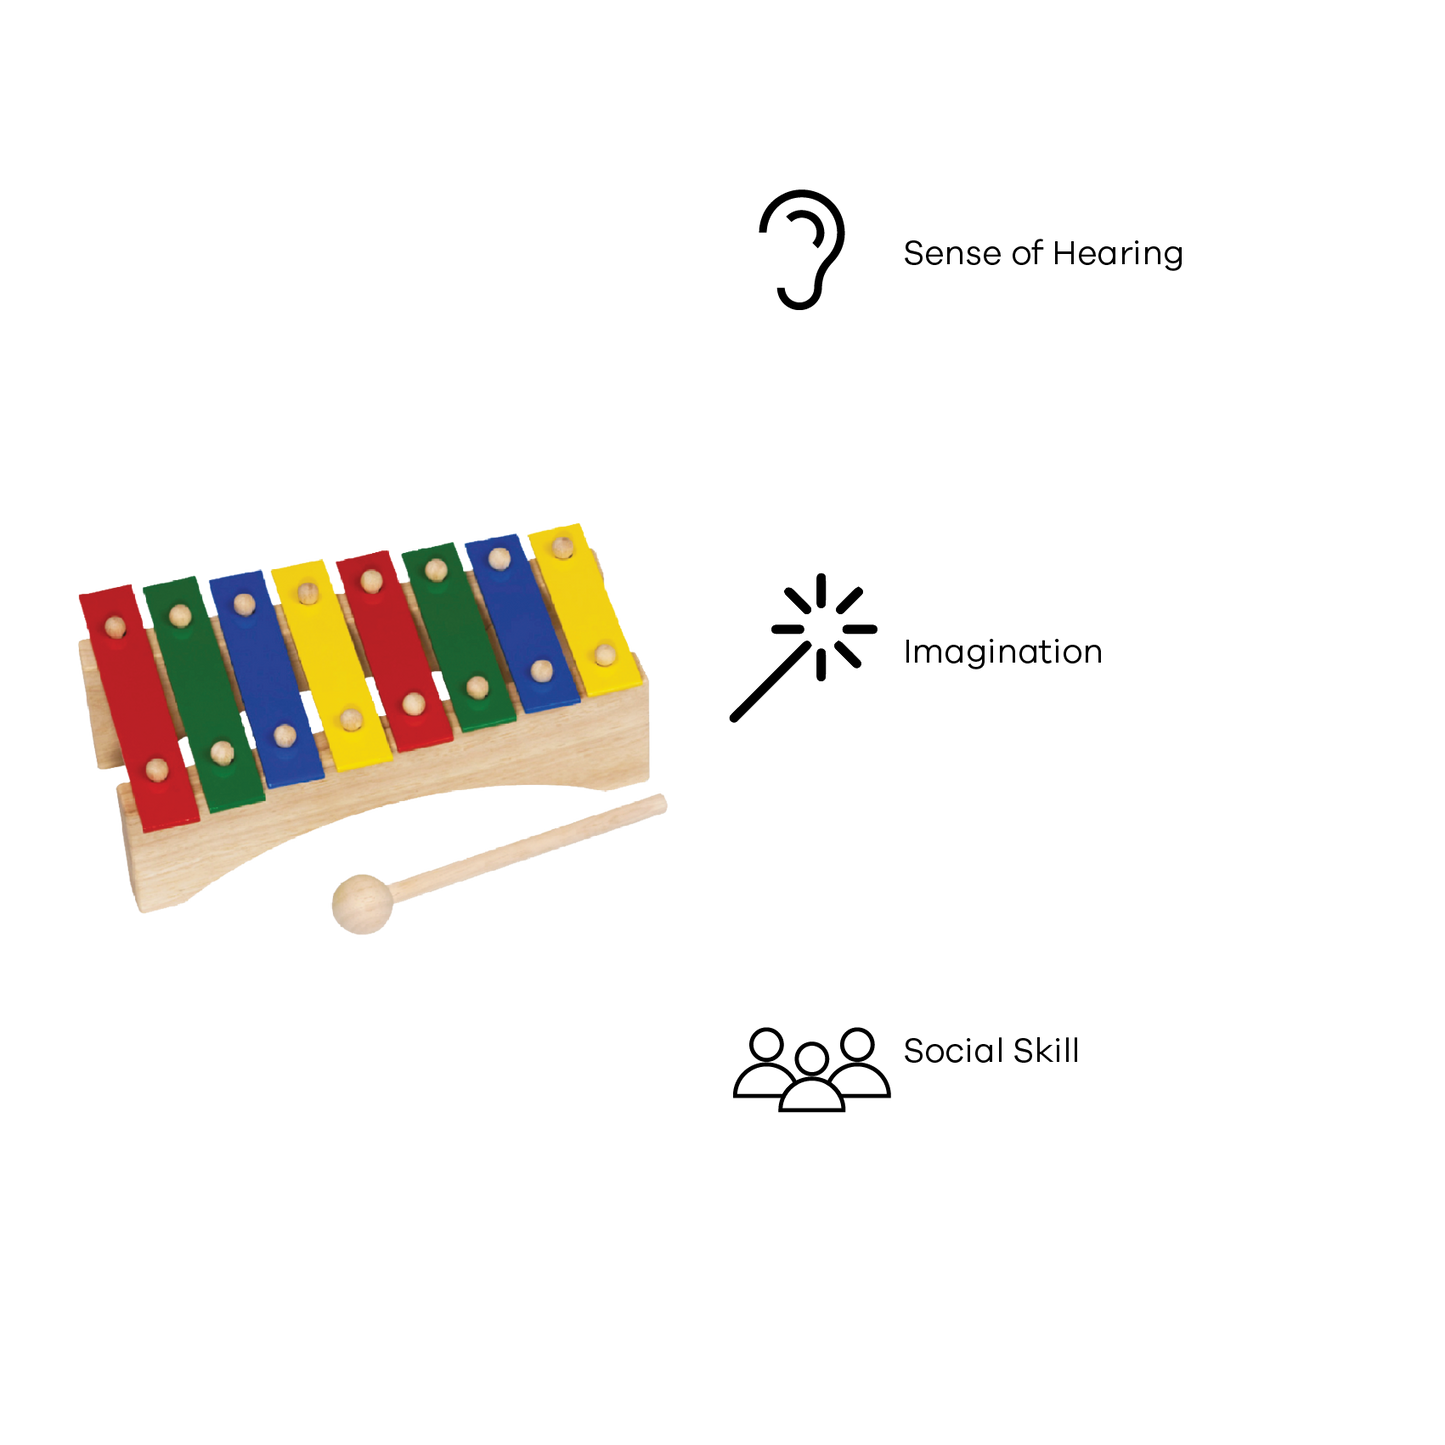 8 NOTES XYLOPHONE